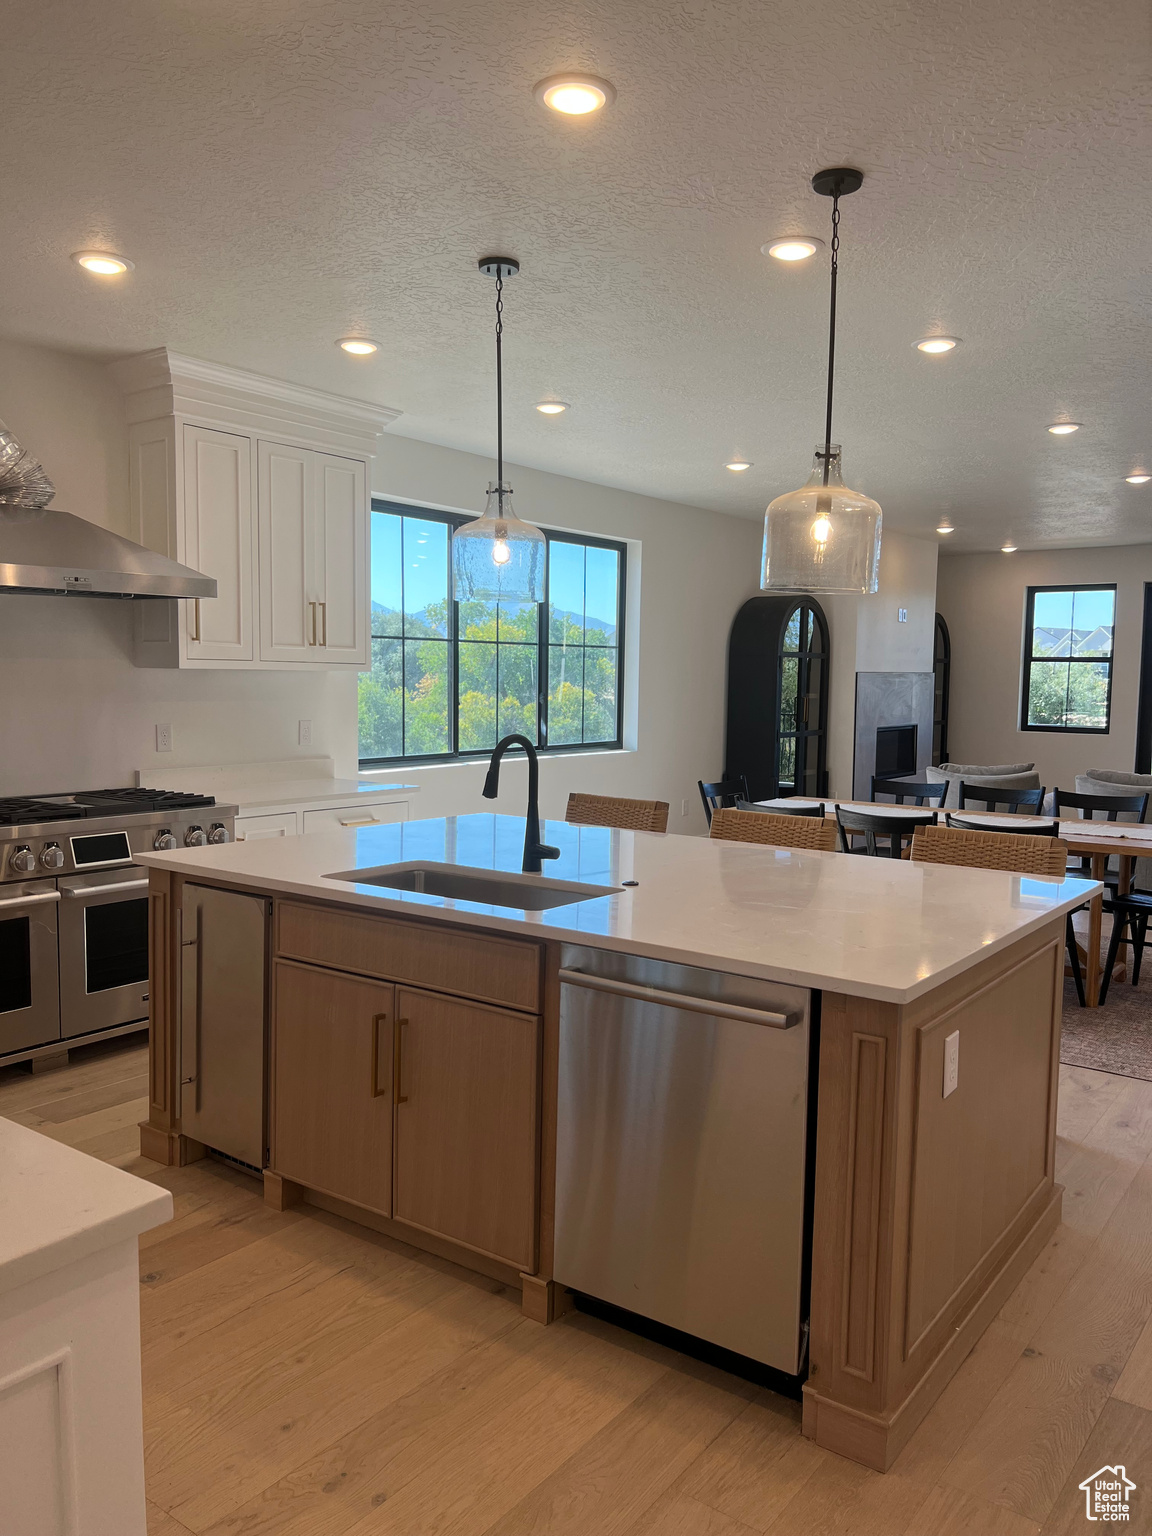 Kitchen featuring appliances with stainless steel finishes, white cabinets, hanging light fixtures, a kitchen island with sink, and light wood-type flooring